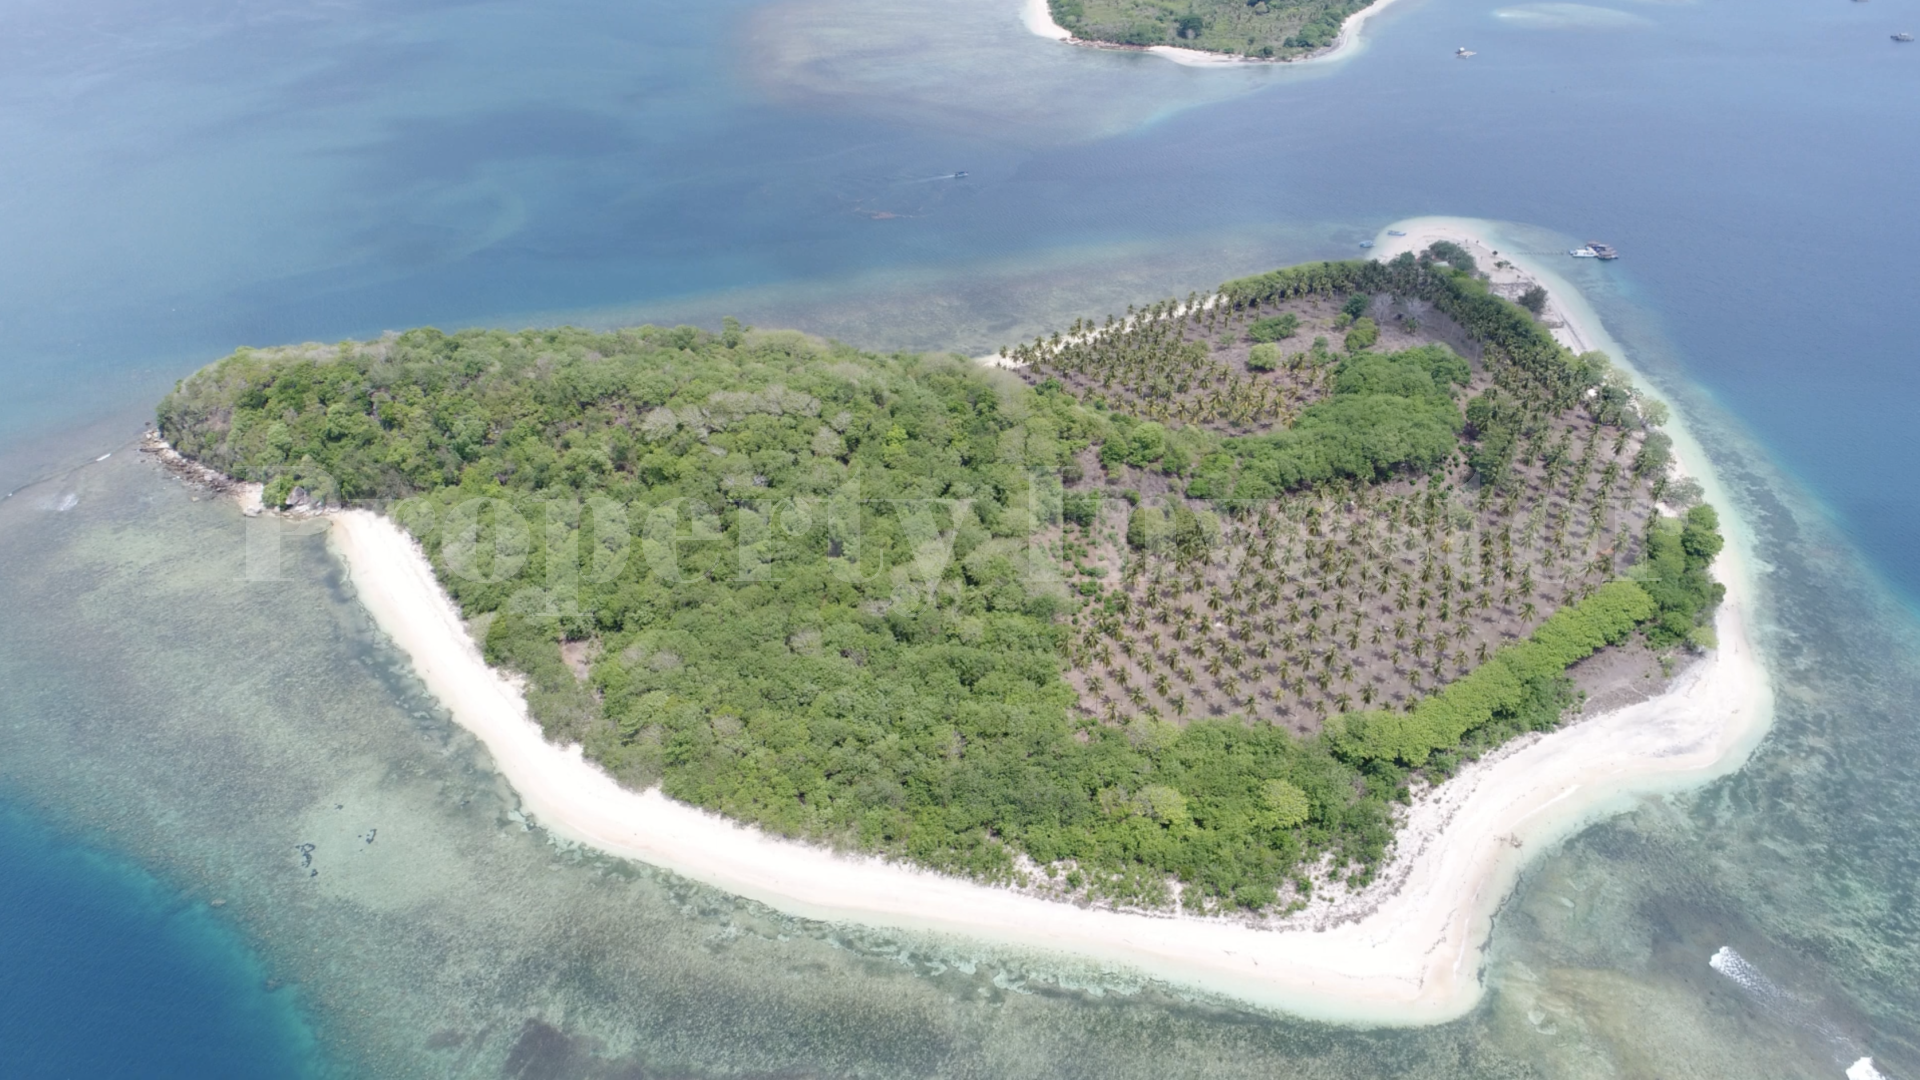 Picturesque 14.9 Hectare Private Virgin Island for Sale Near Lombok, Indonesia